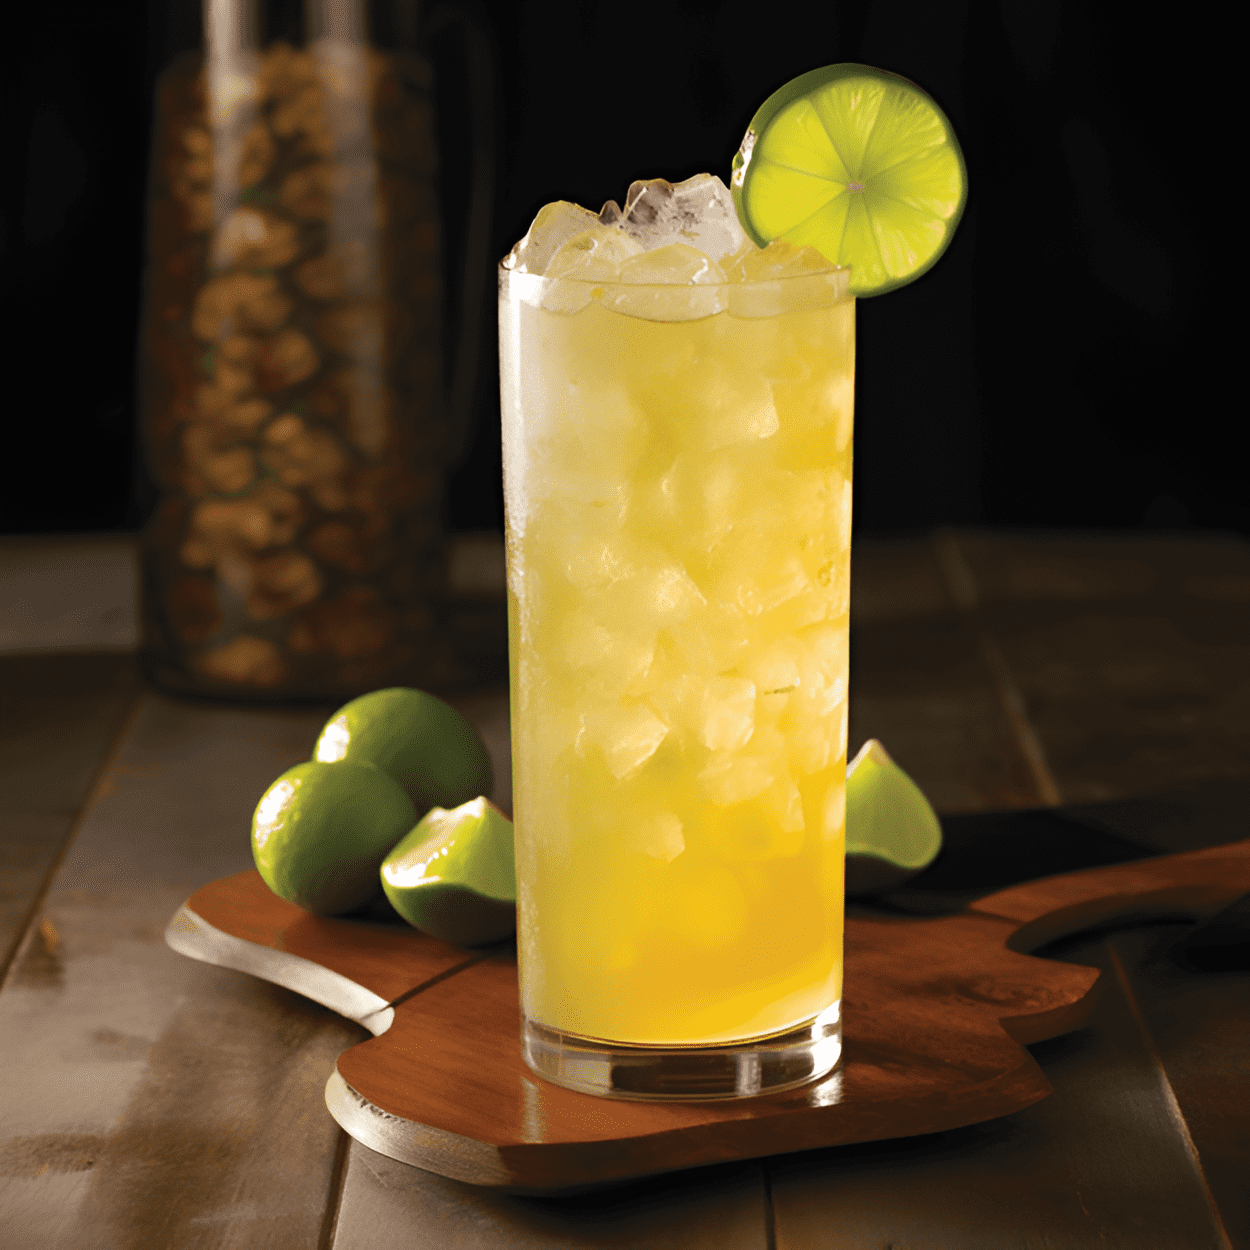 Werewolf Cocktail Recipe - The Werewolf cocktail is a delightful blend of sweet, sour, and spicy flavors. The sweetness of the pineapple juice is balanced by the tartness of the lime, while the spiciness of the ginger beer adds a surprising kick. The rum gives it a strong, robust flavor that lingers on the palate.